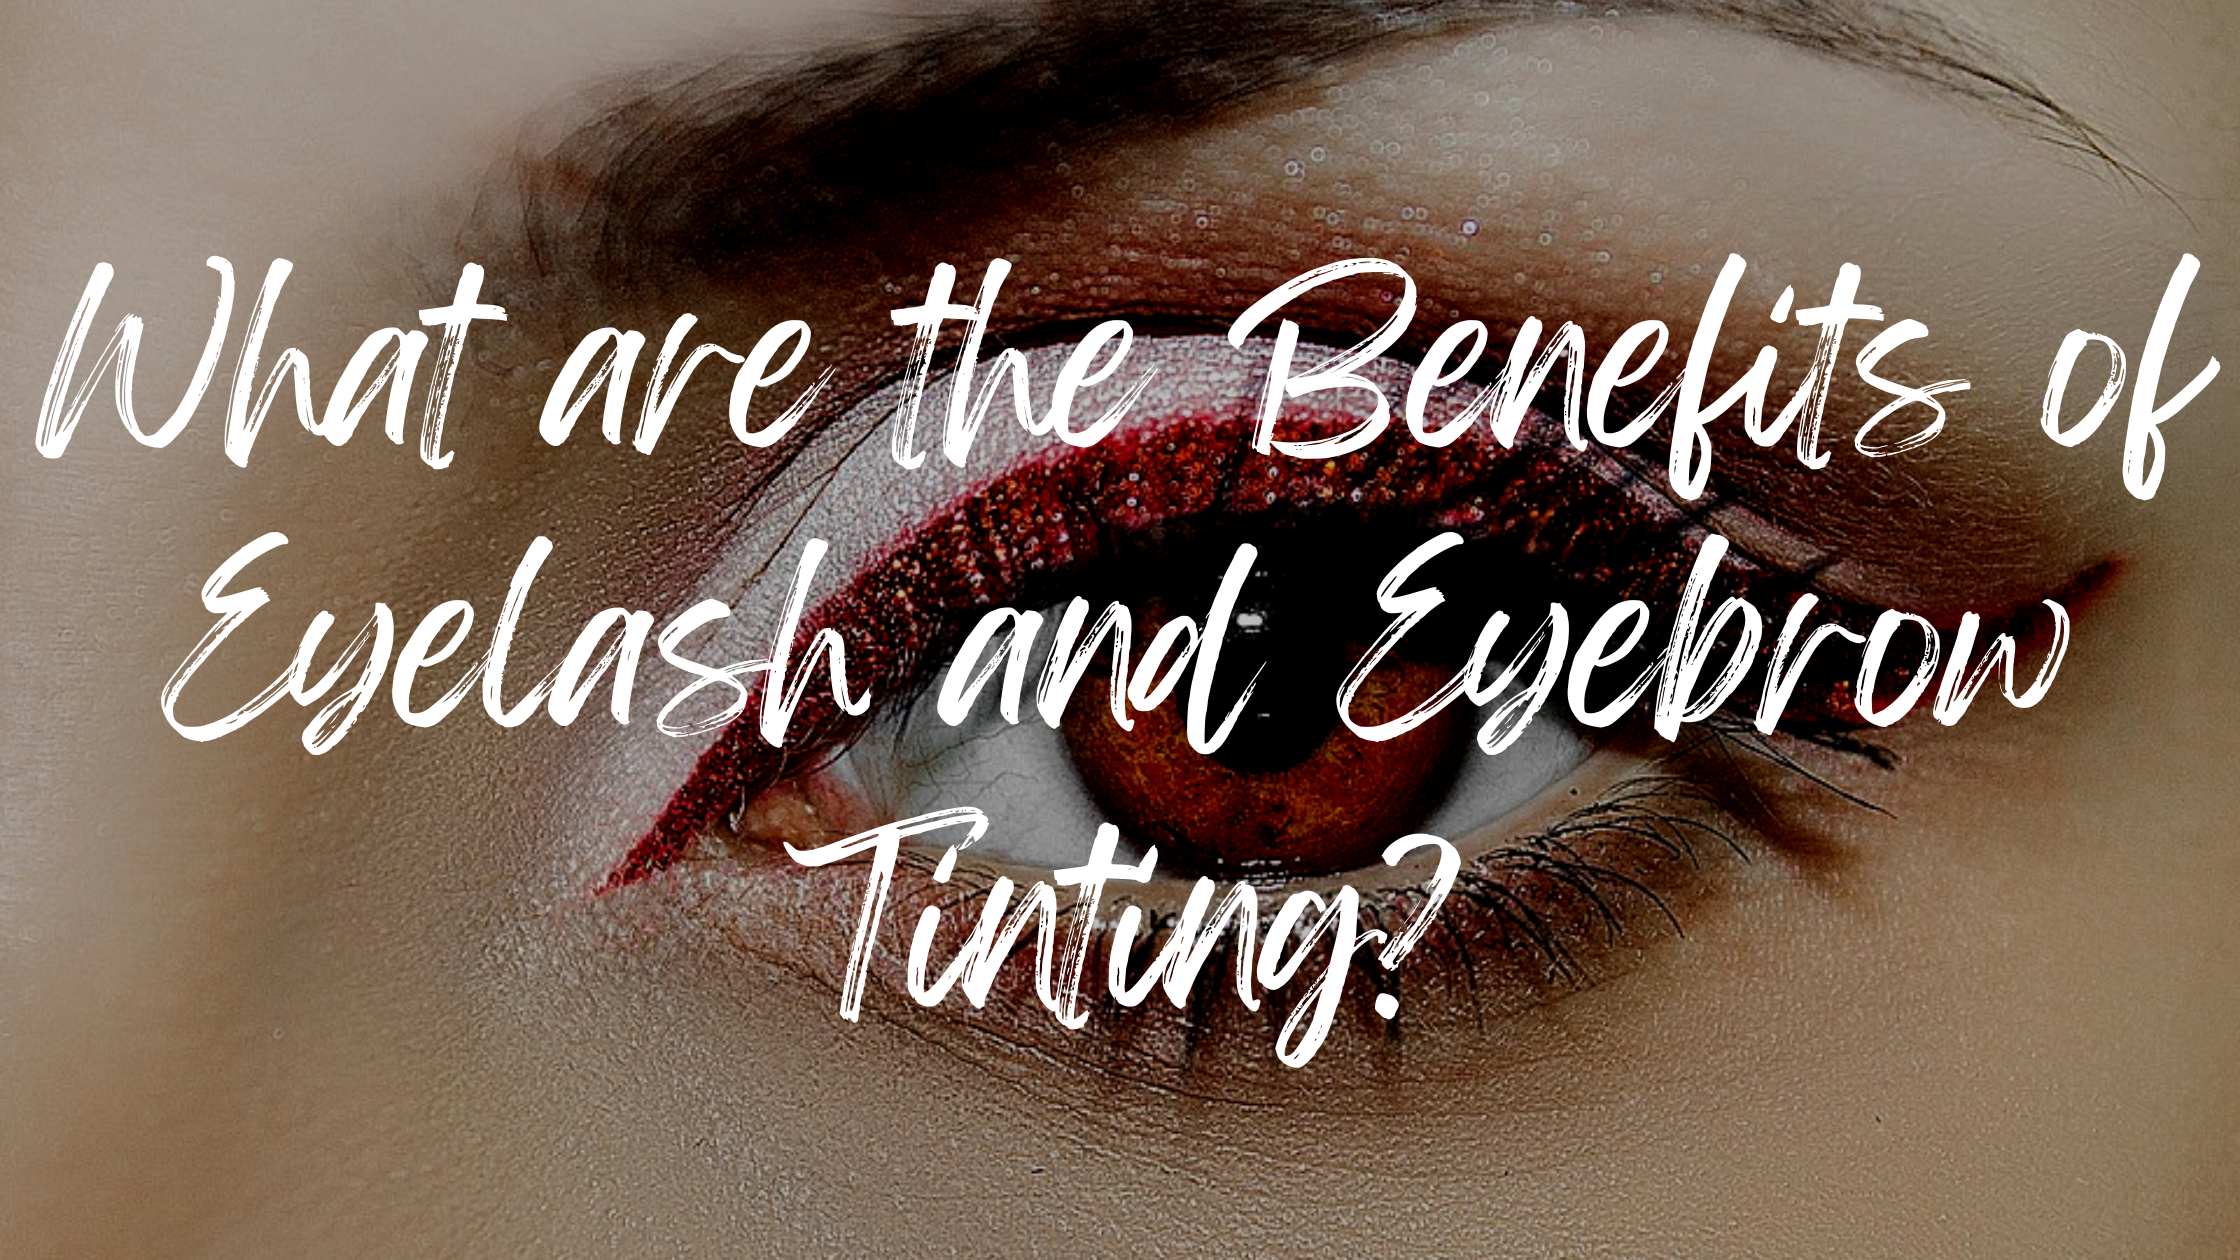 What are the Benefits of Eyelash and Eyebrow Tinting?